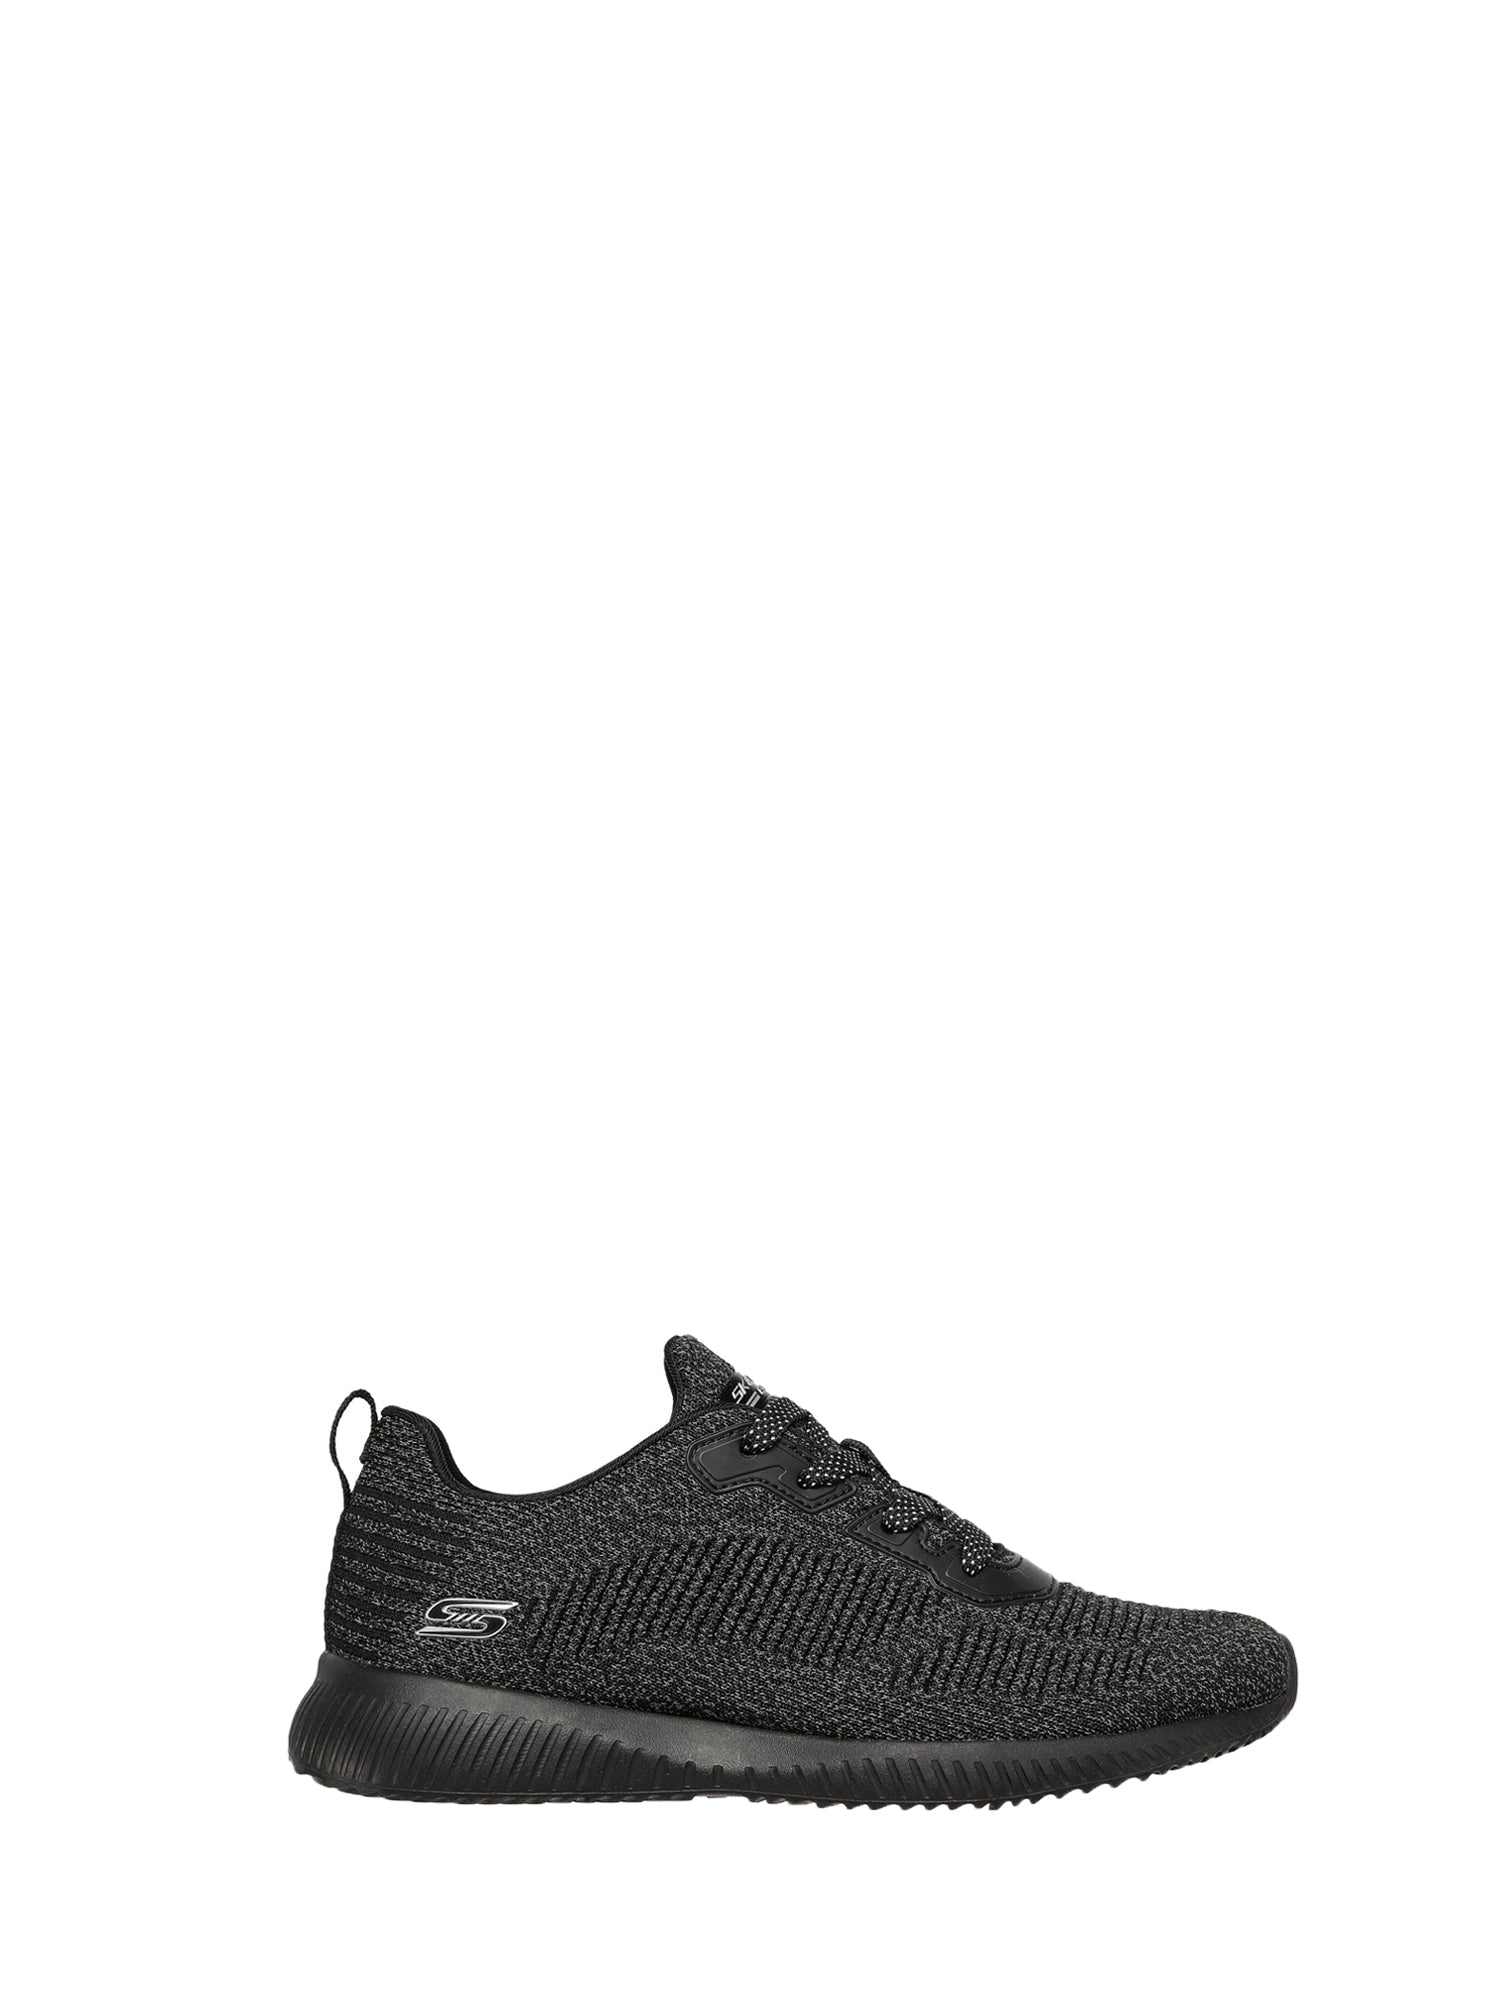 SKECHERS SNEAKERS BOBS SQUAD-GHOST STAR NERO